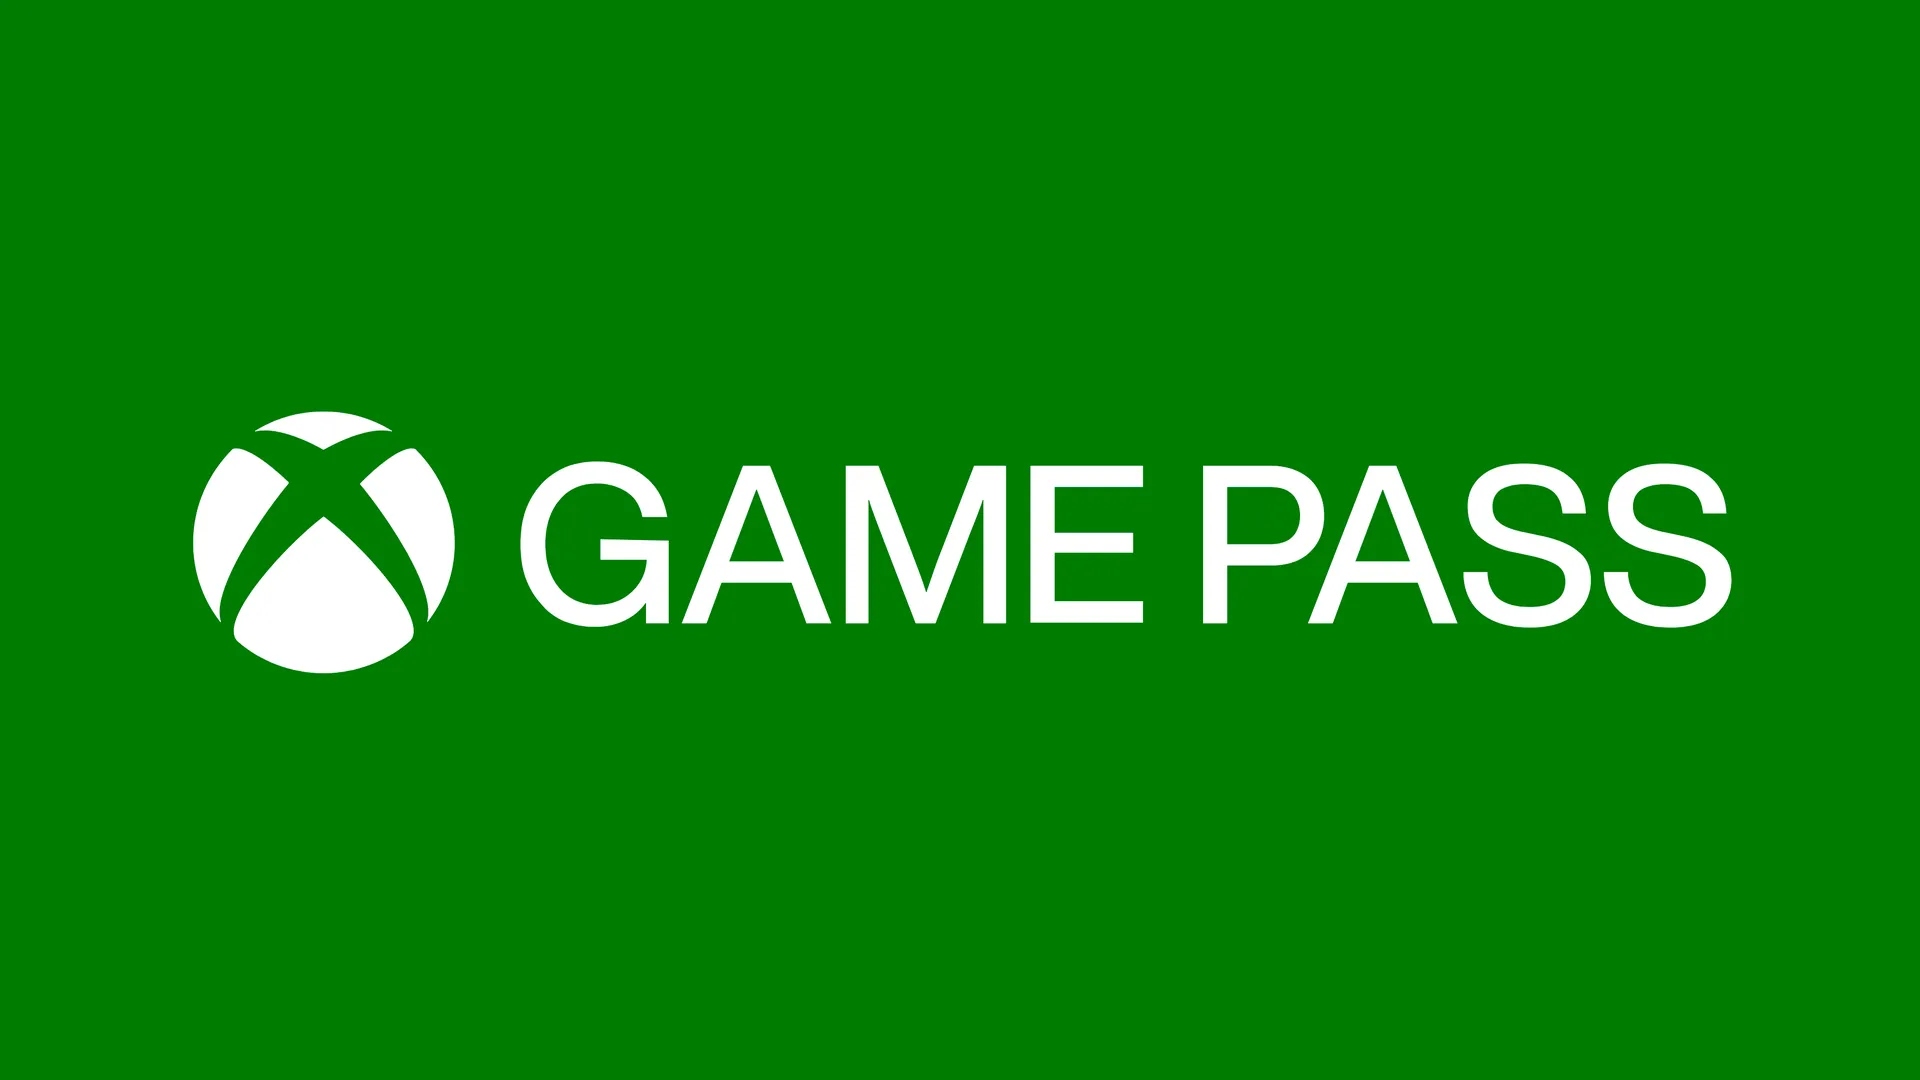 Xbox’s Activision deal is already working: data suggests more US adults are becoming interested in Game Pass